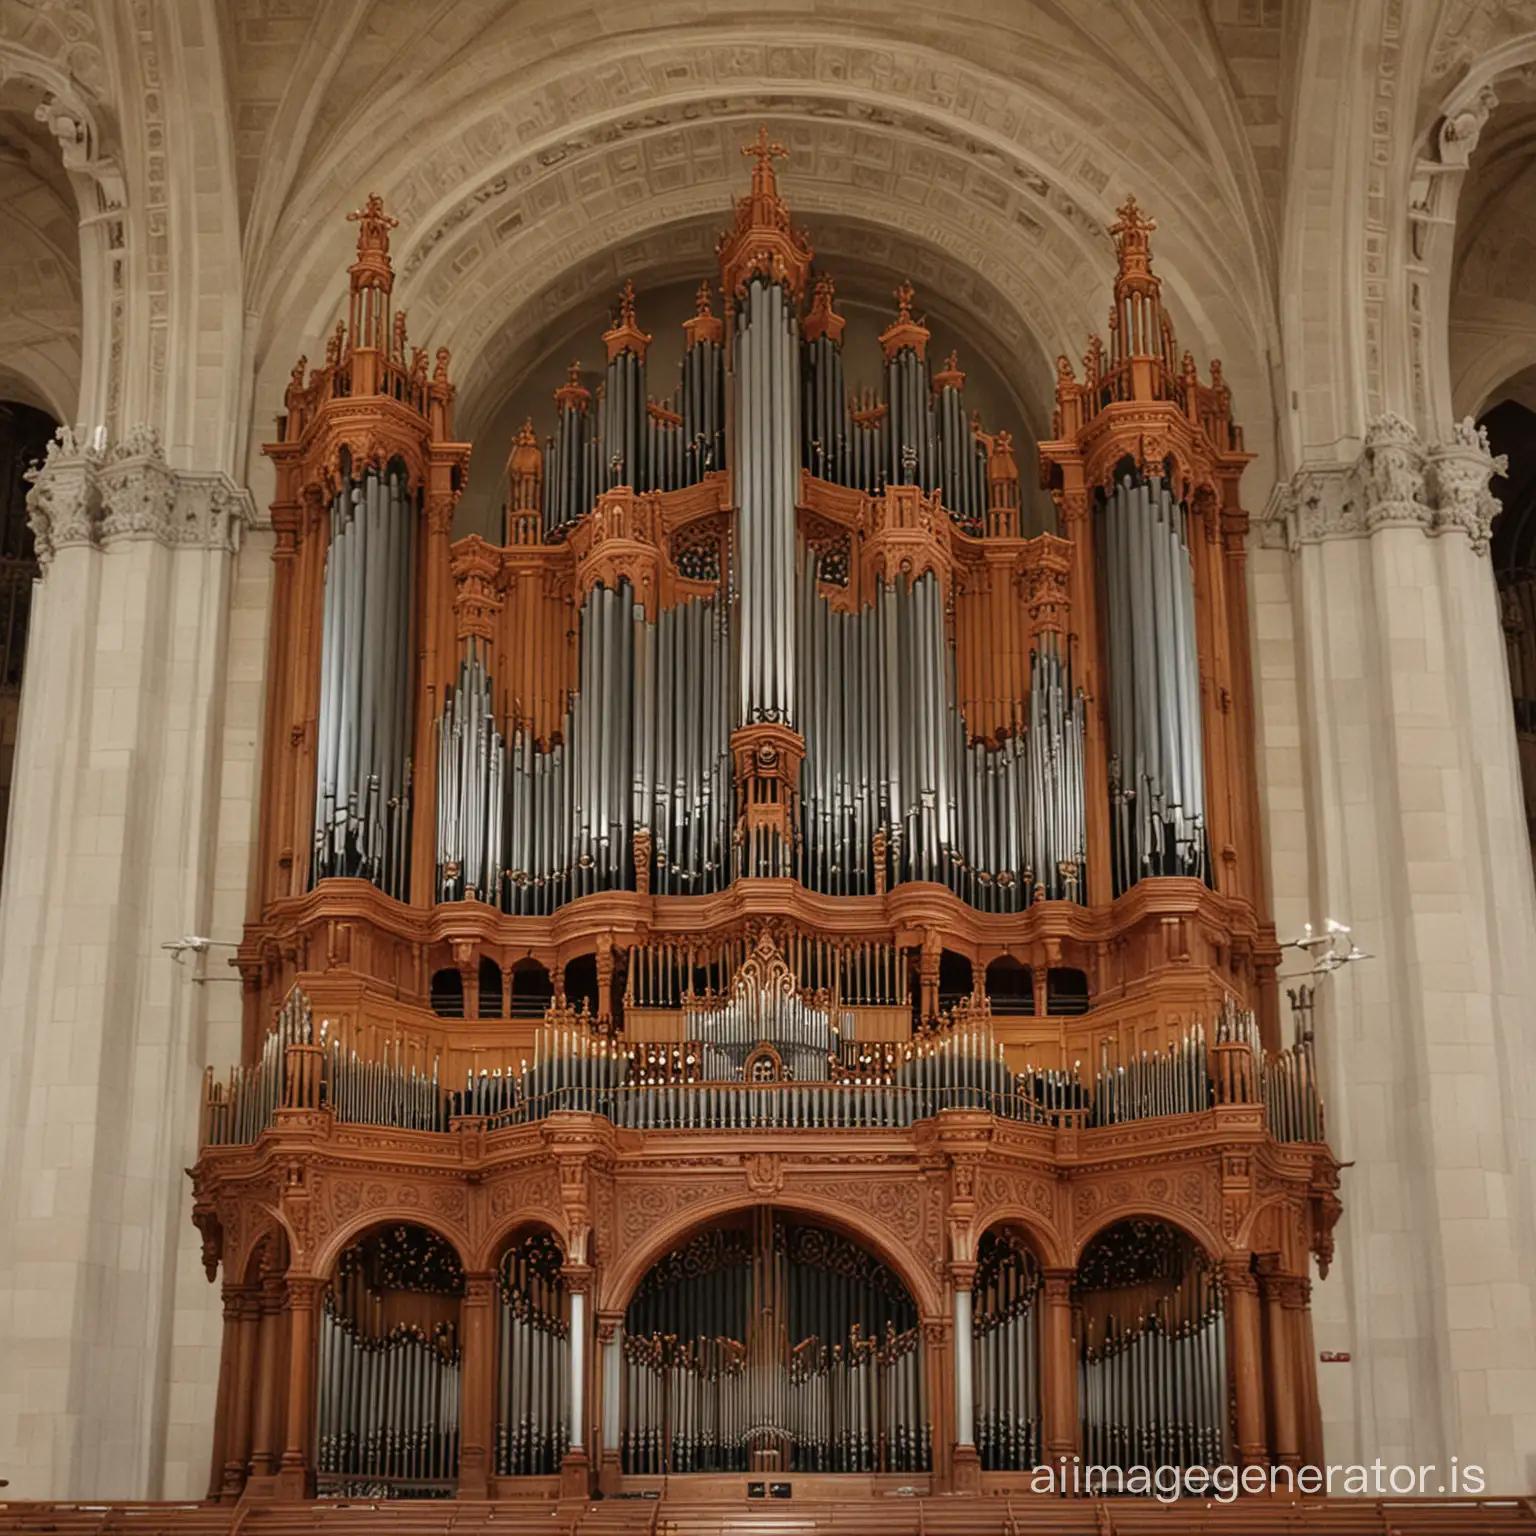 Majestic-Pipe-Organ-in-Grand-Cathedral